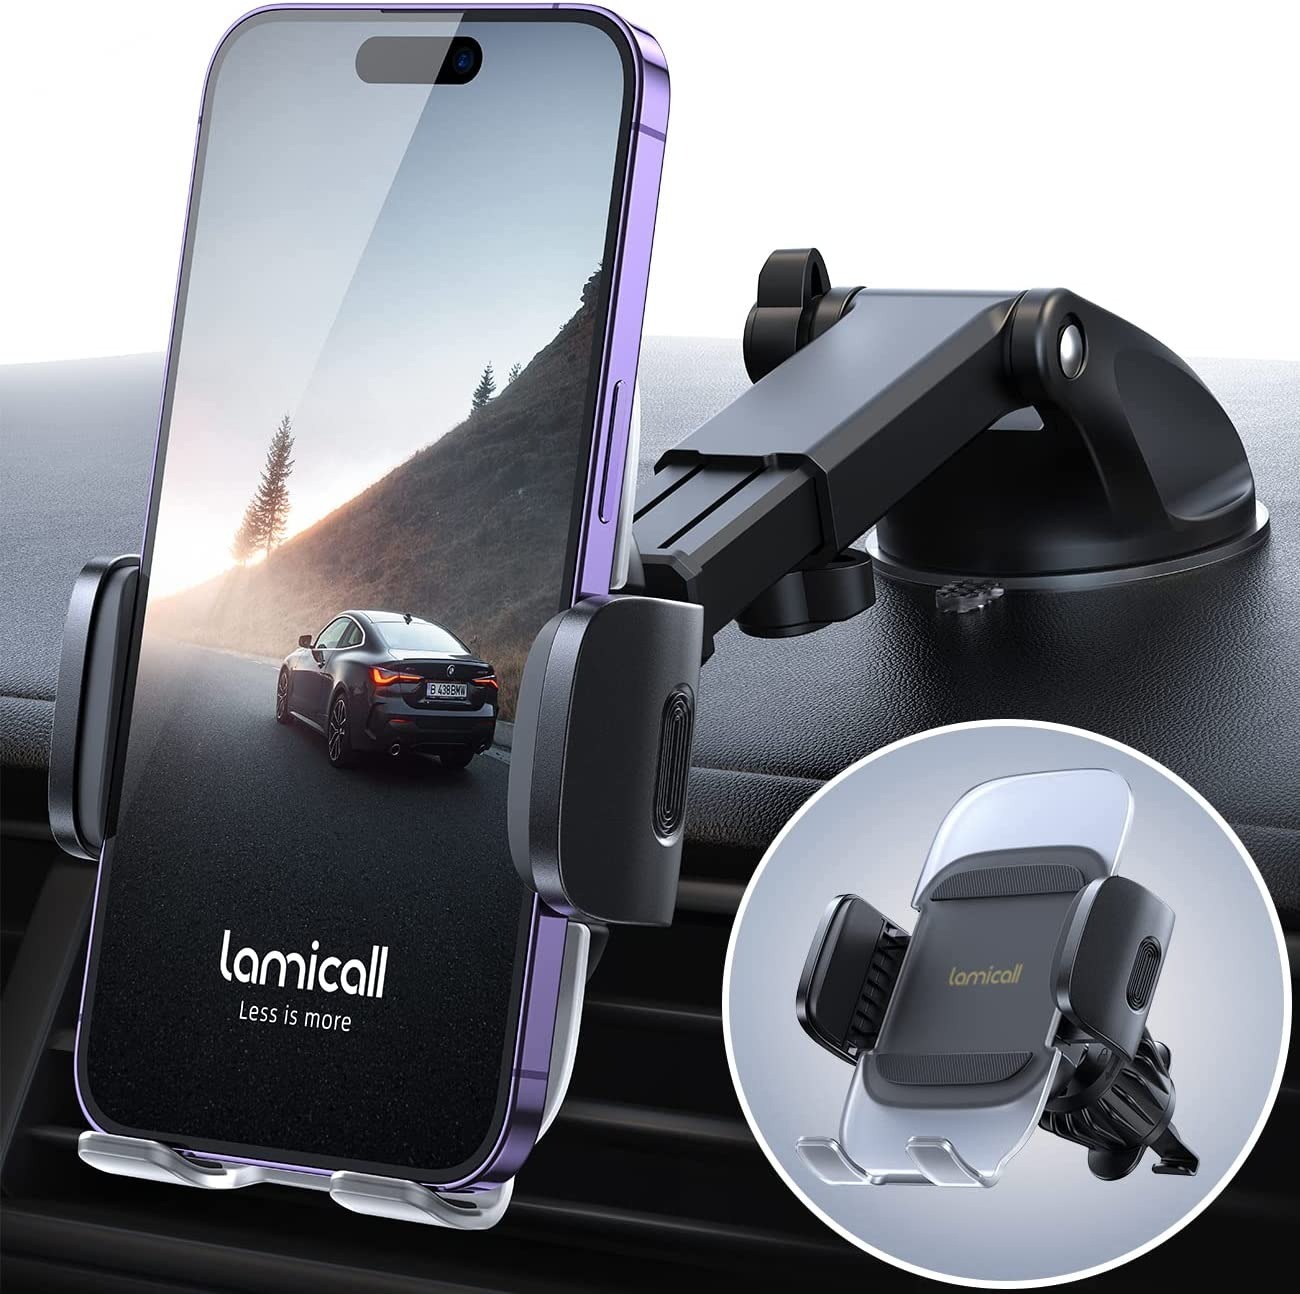 Lamicall 3-in-1 Dashboard Car Phone Mount (Black) $10 + Free Shipping w/ Prime or Orders $25+